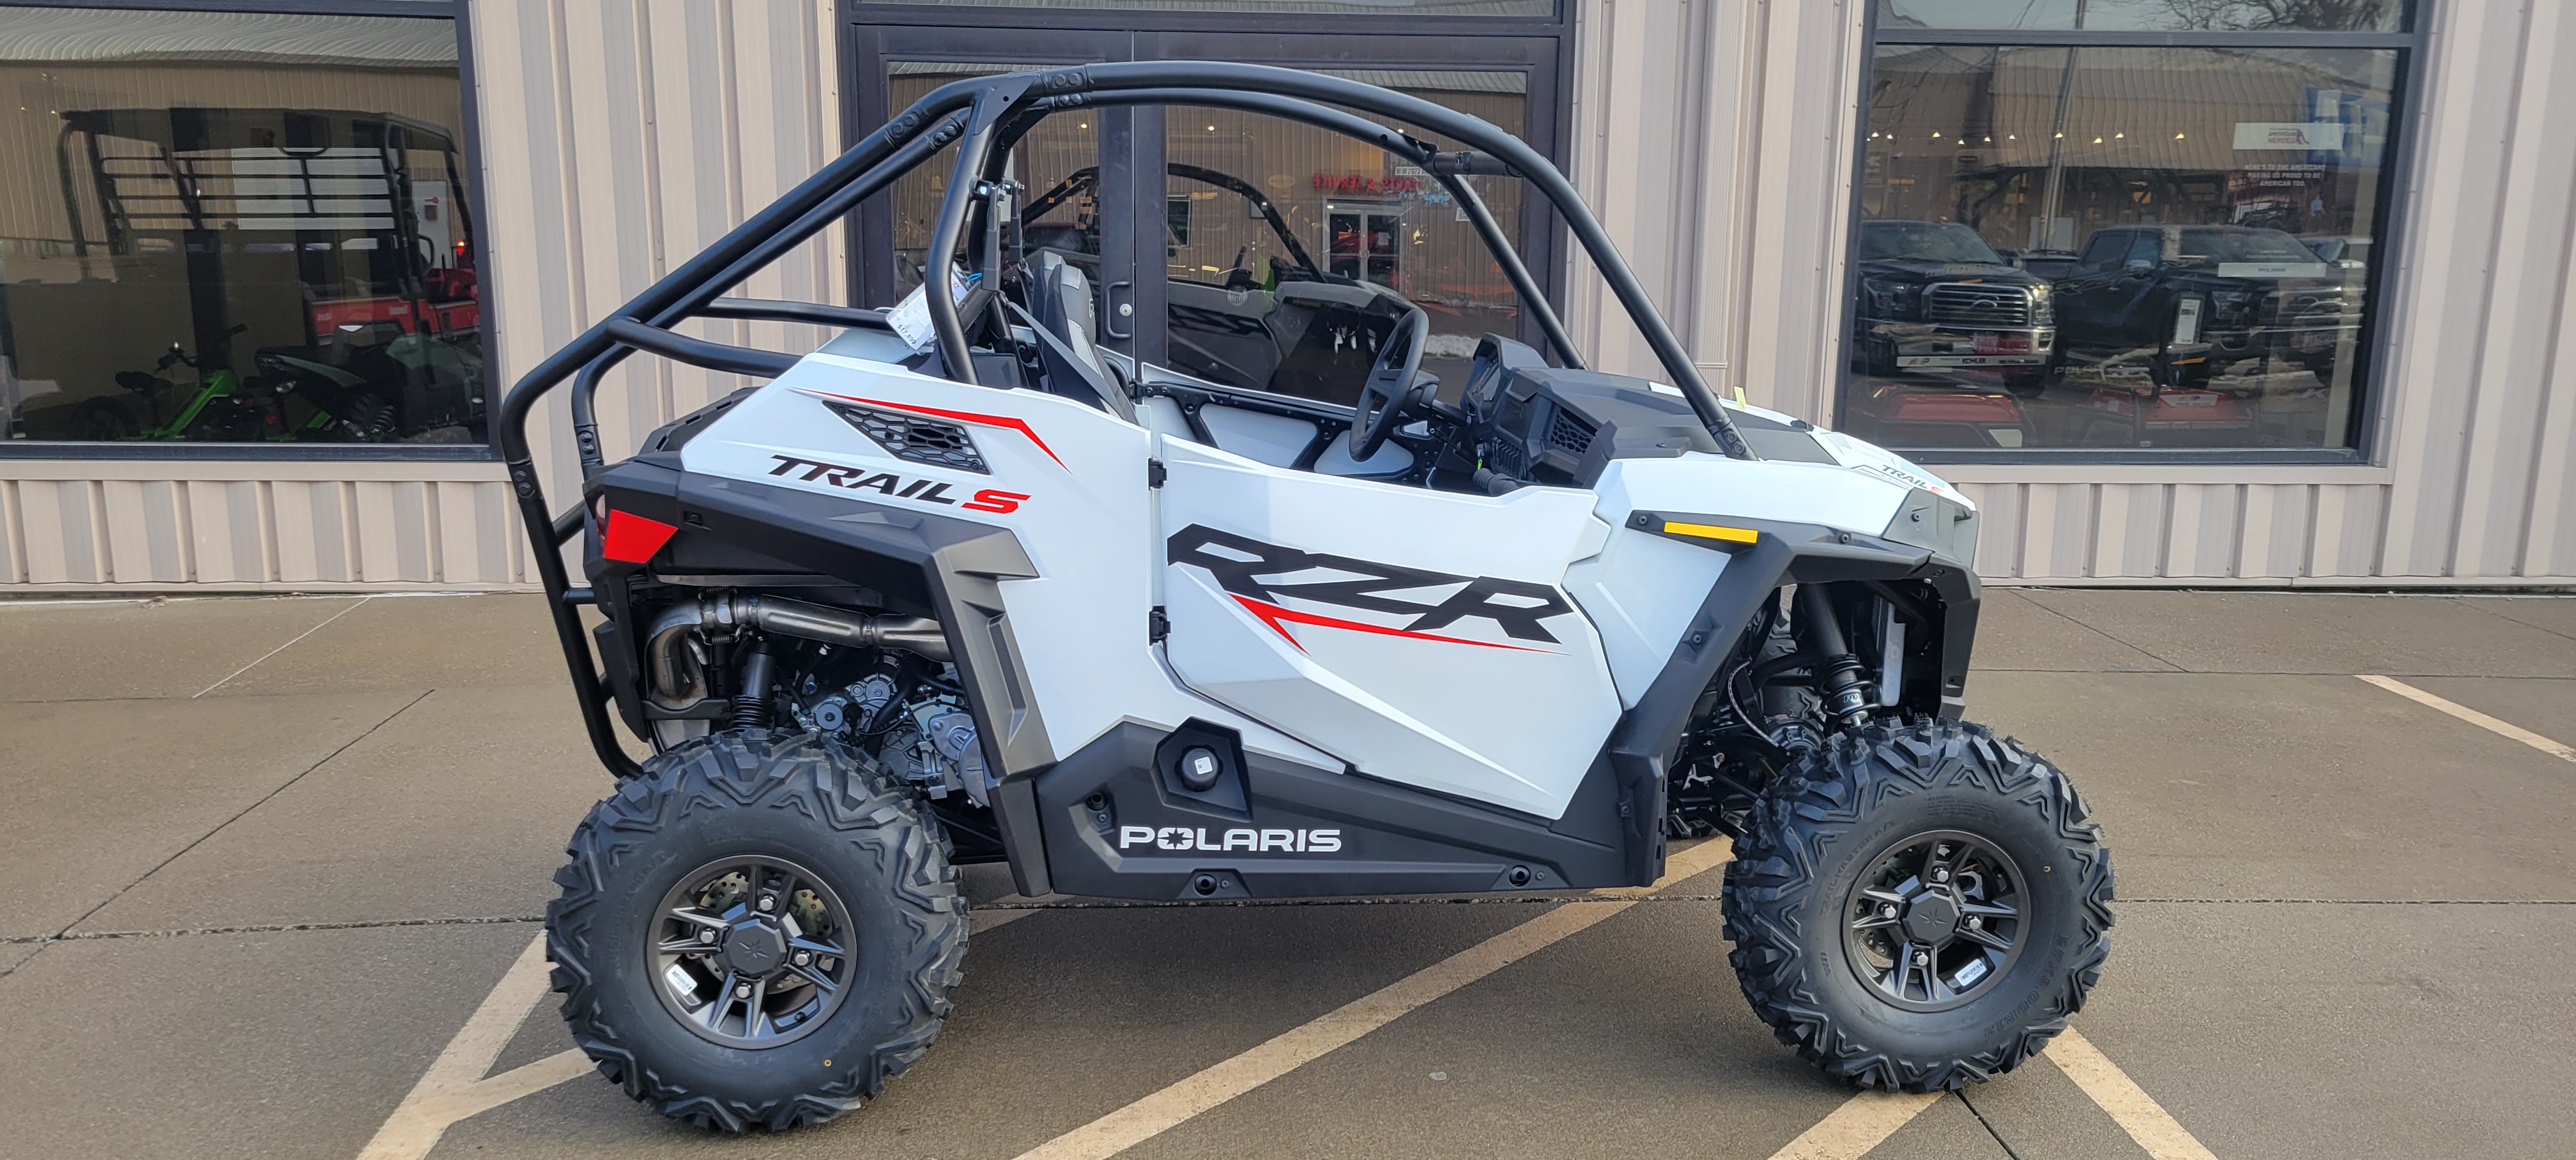 2023 Polaris RZR Trail S 900 Sport at Brenny's Motorcycle Clinic, Bettendorf, IA 52722